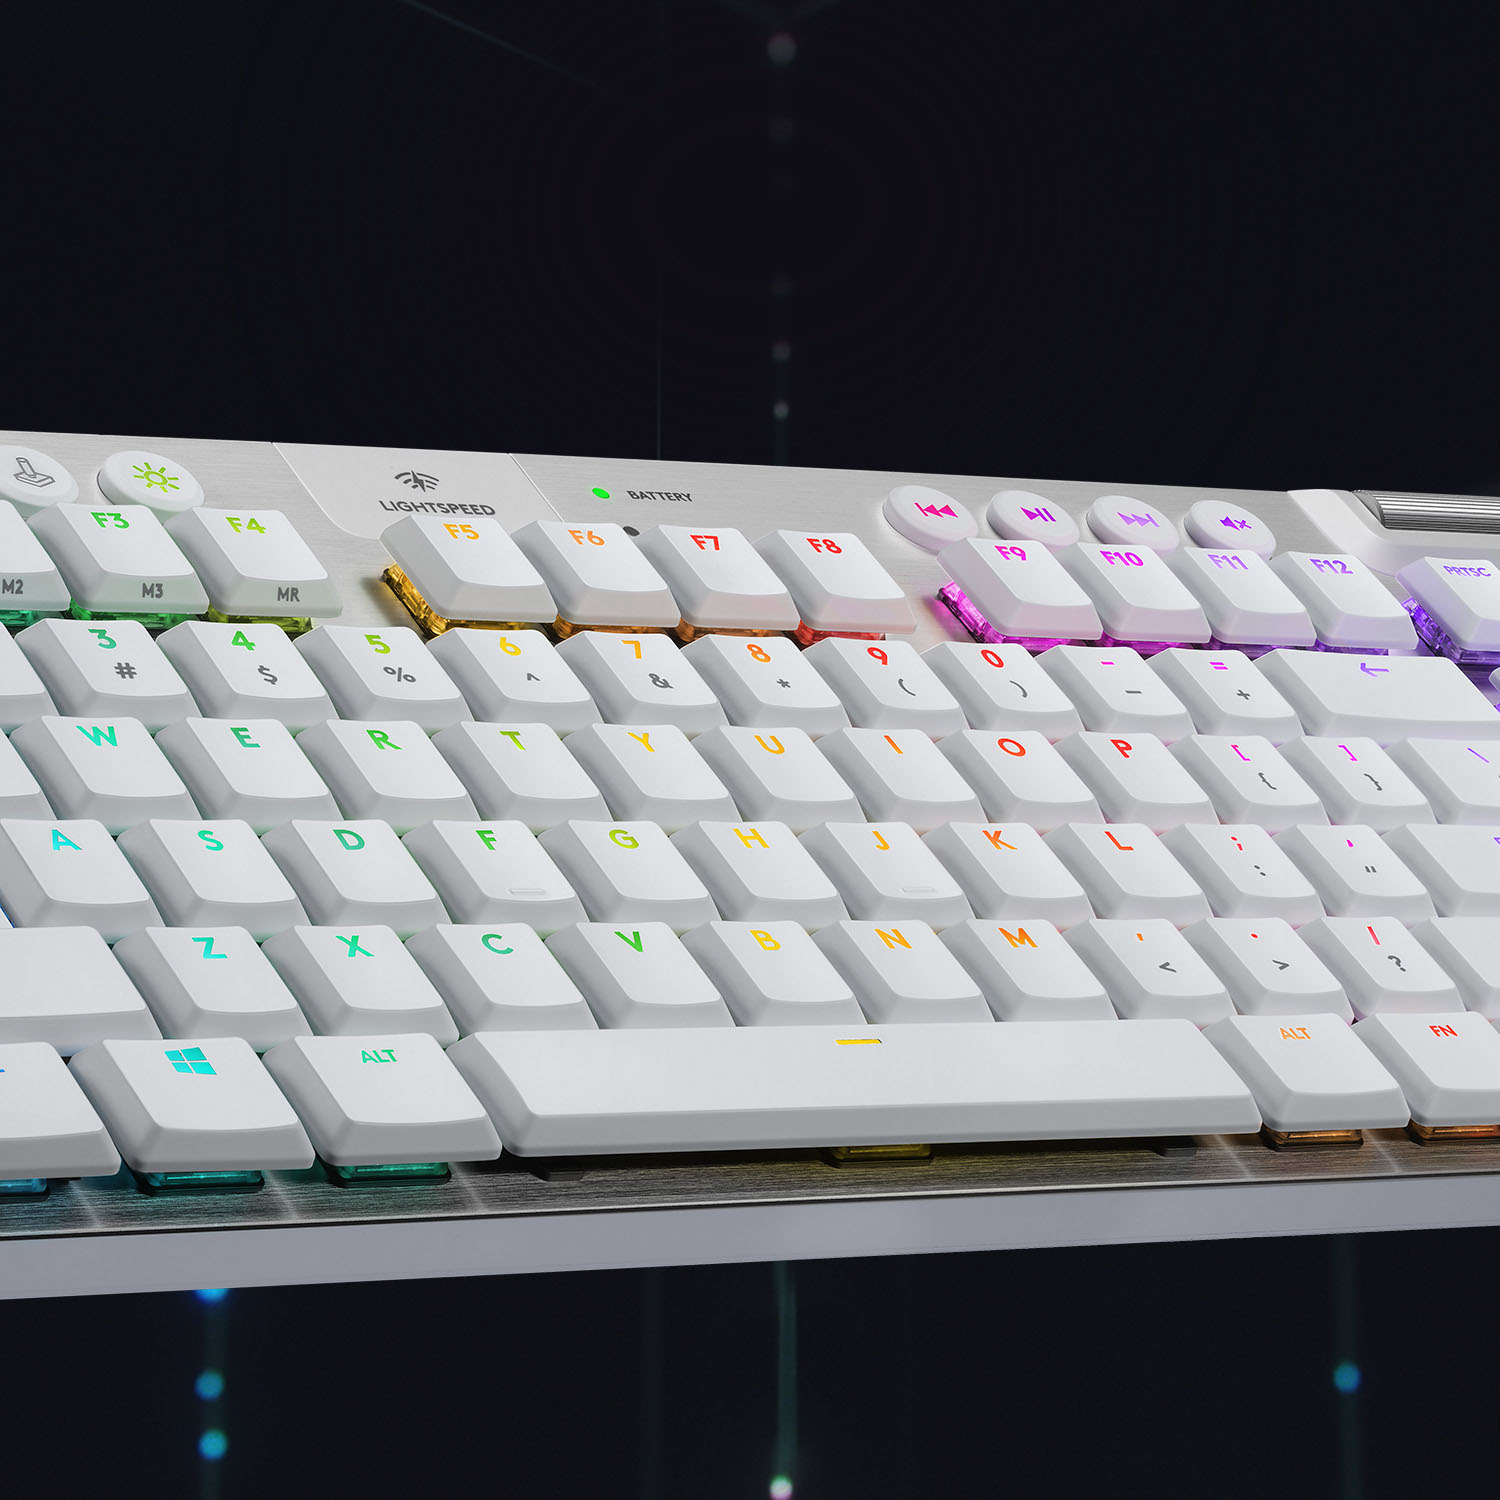 Build a PC for Keyboard Logitech G715 TKL Wireless RGB GX Tactile  (920-010465) Off-White with compatibility check and price analysis